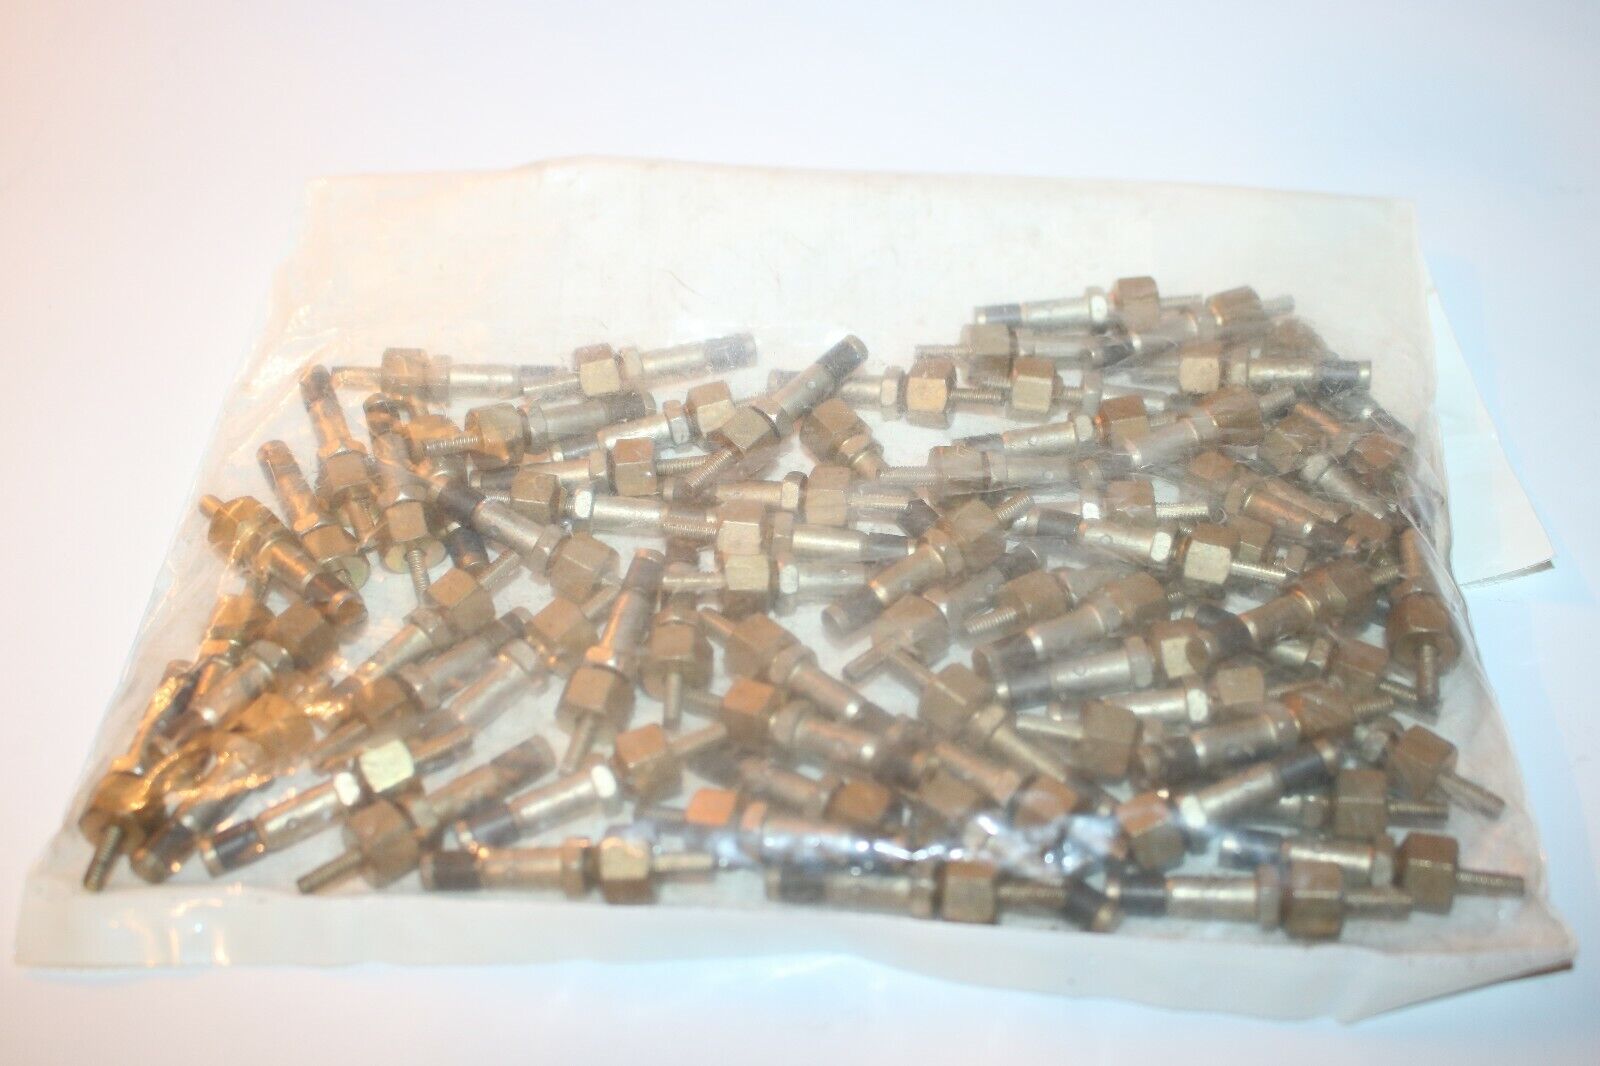 Lot of 71 Herndon Products Military Blind Rivets- NAS1751-3DL6